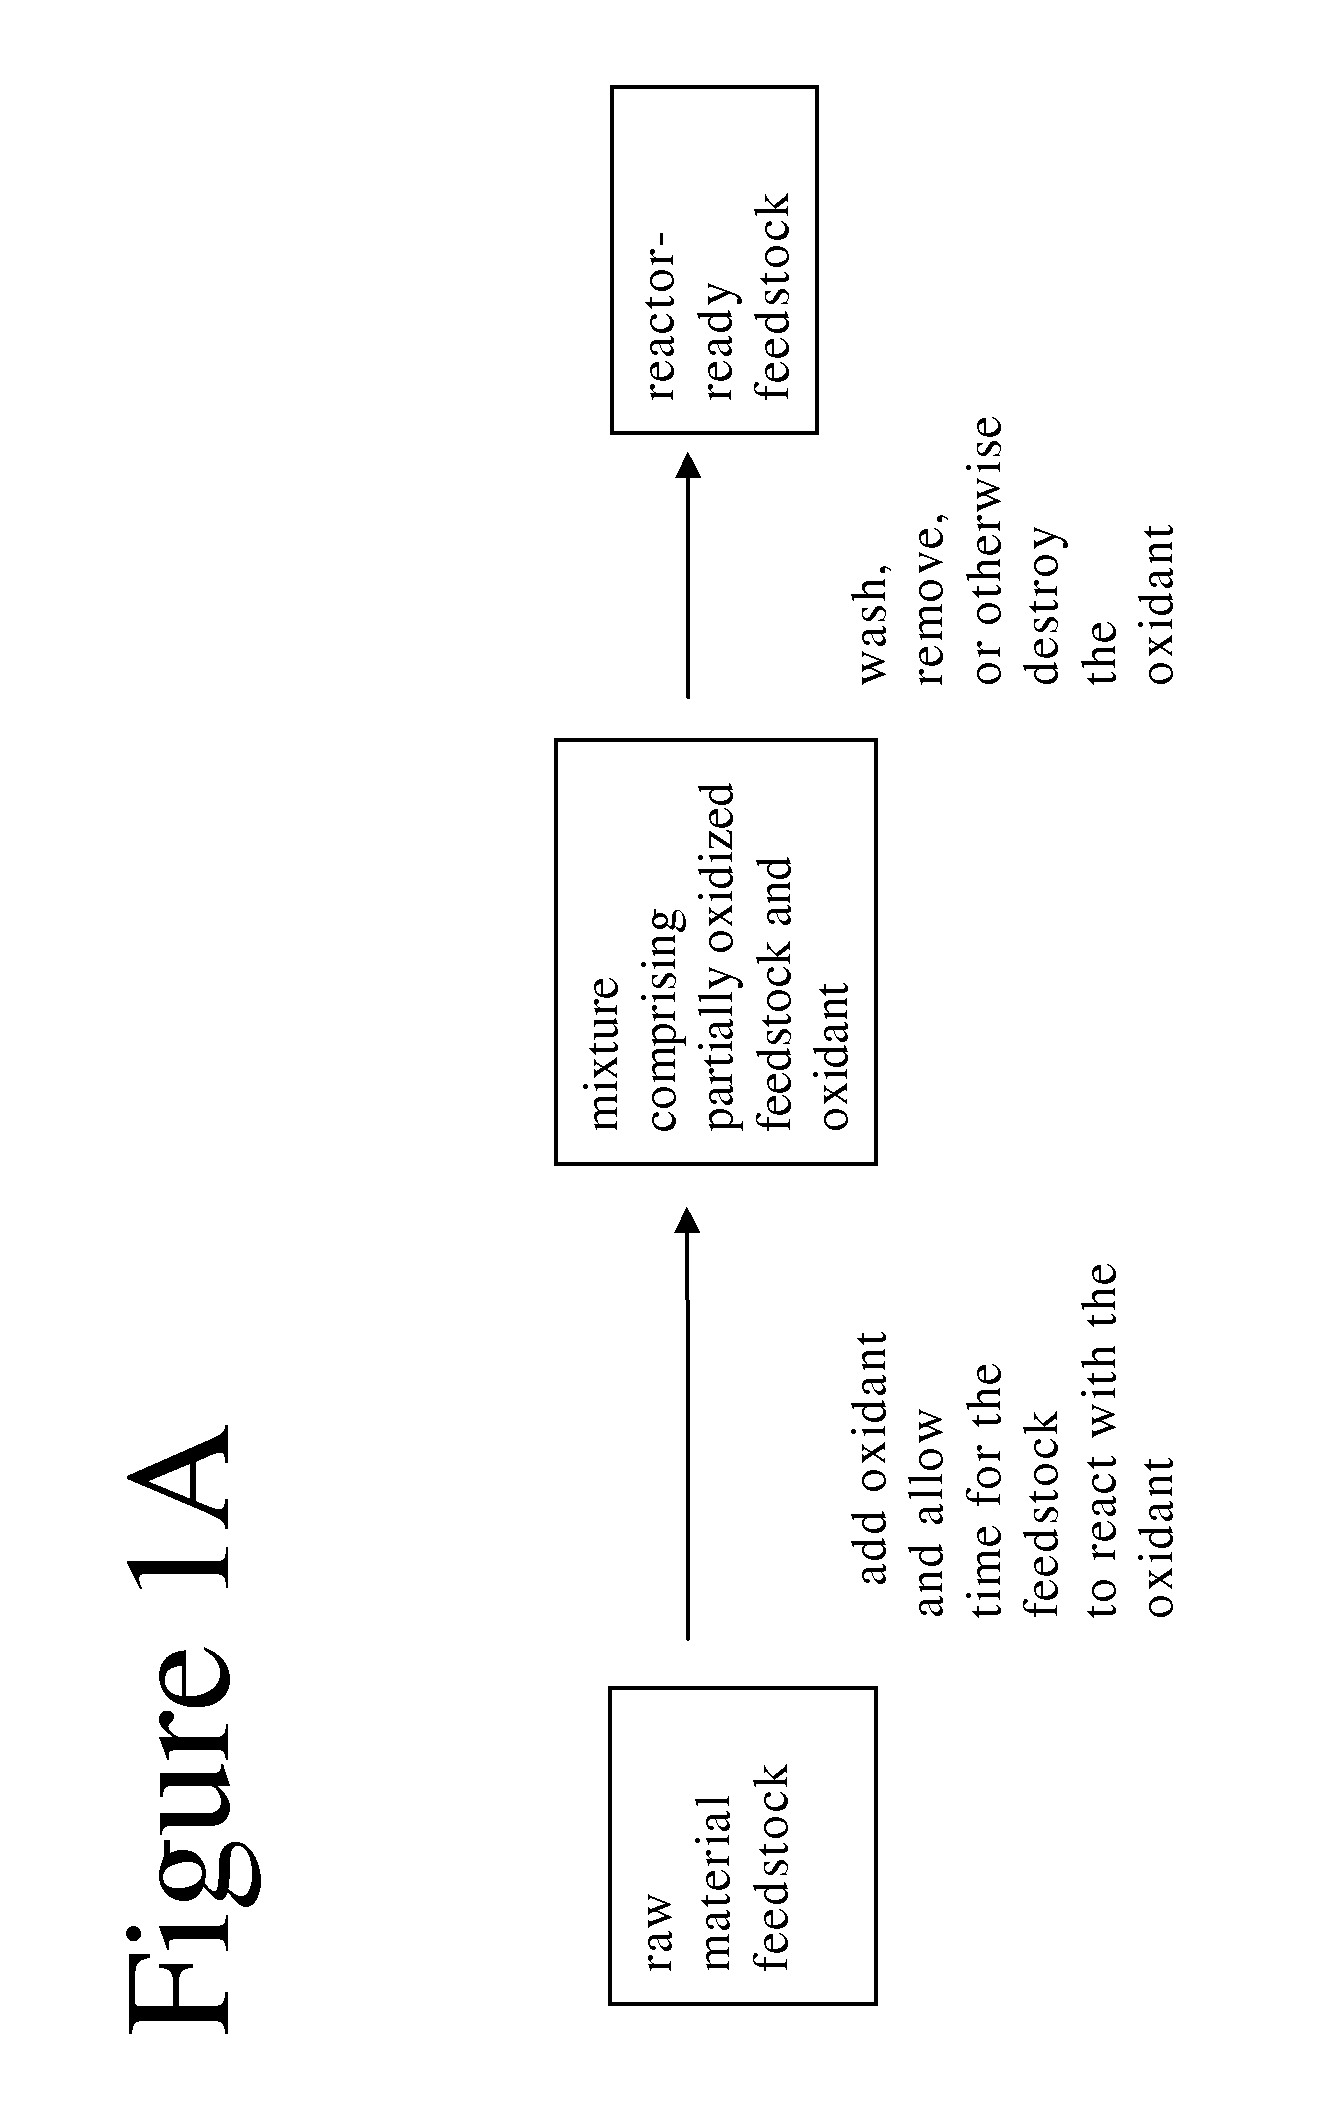 Method for pretreatment of cellulosic and lignocellulosic materials for conversion into bioenergy